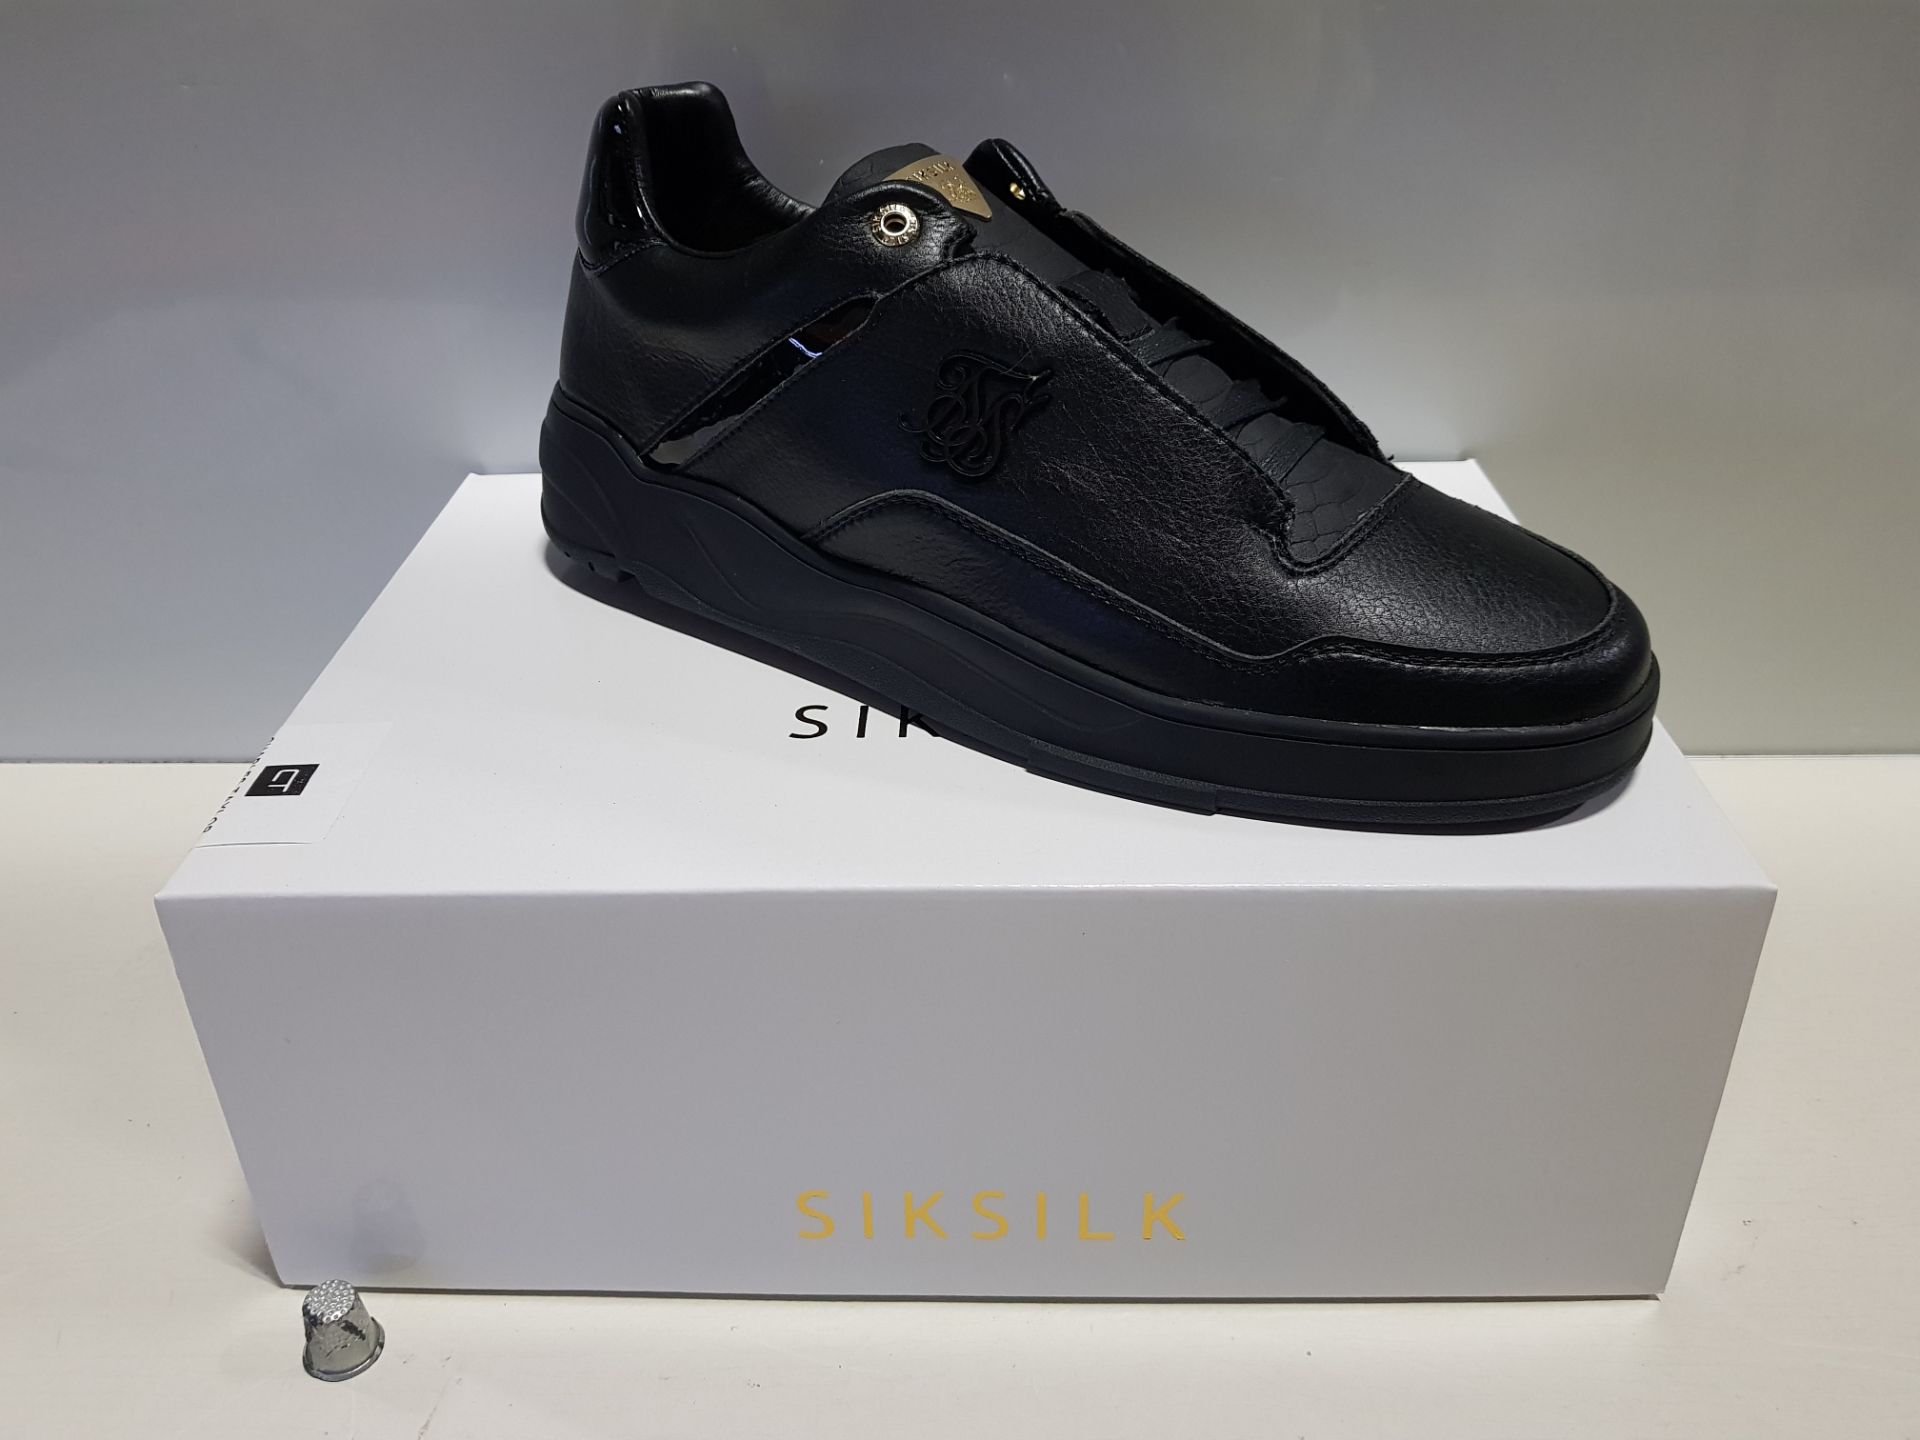 5 X BRAND NEW SIK SILK BLAZE LUX IN BLACK AND GOLD - IN SIZE UK 8 - ( SS-16120 )